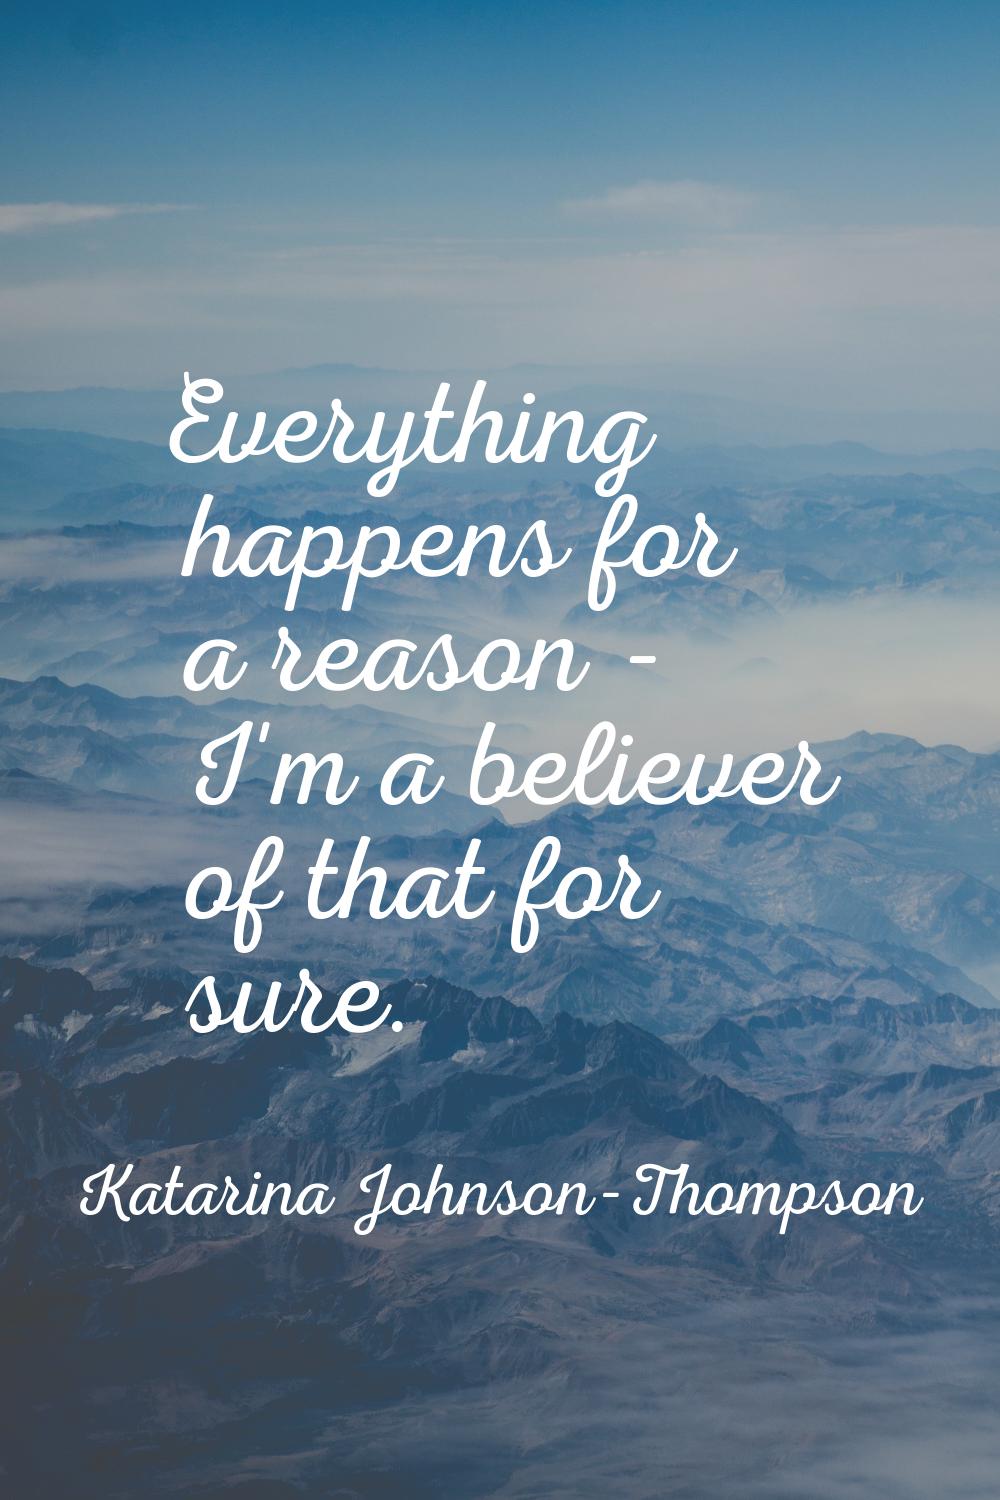 Everything happens for a reason - I'm a believer of that for sure.